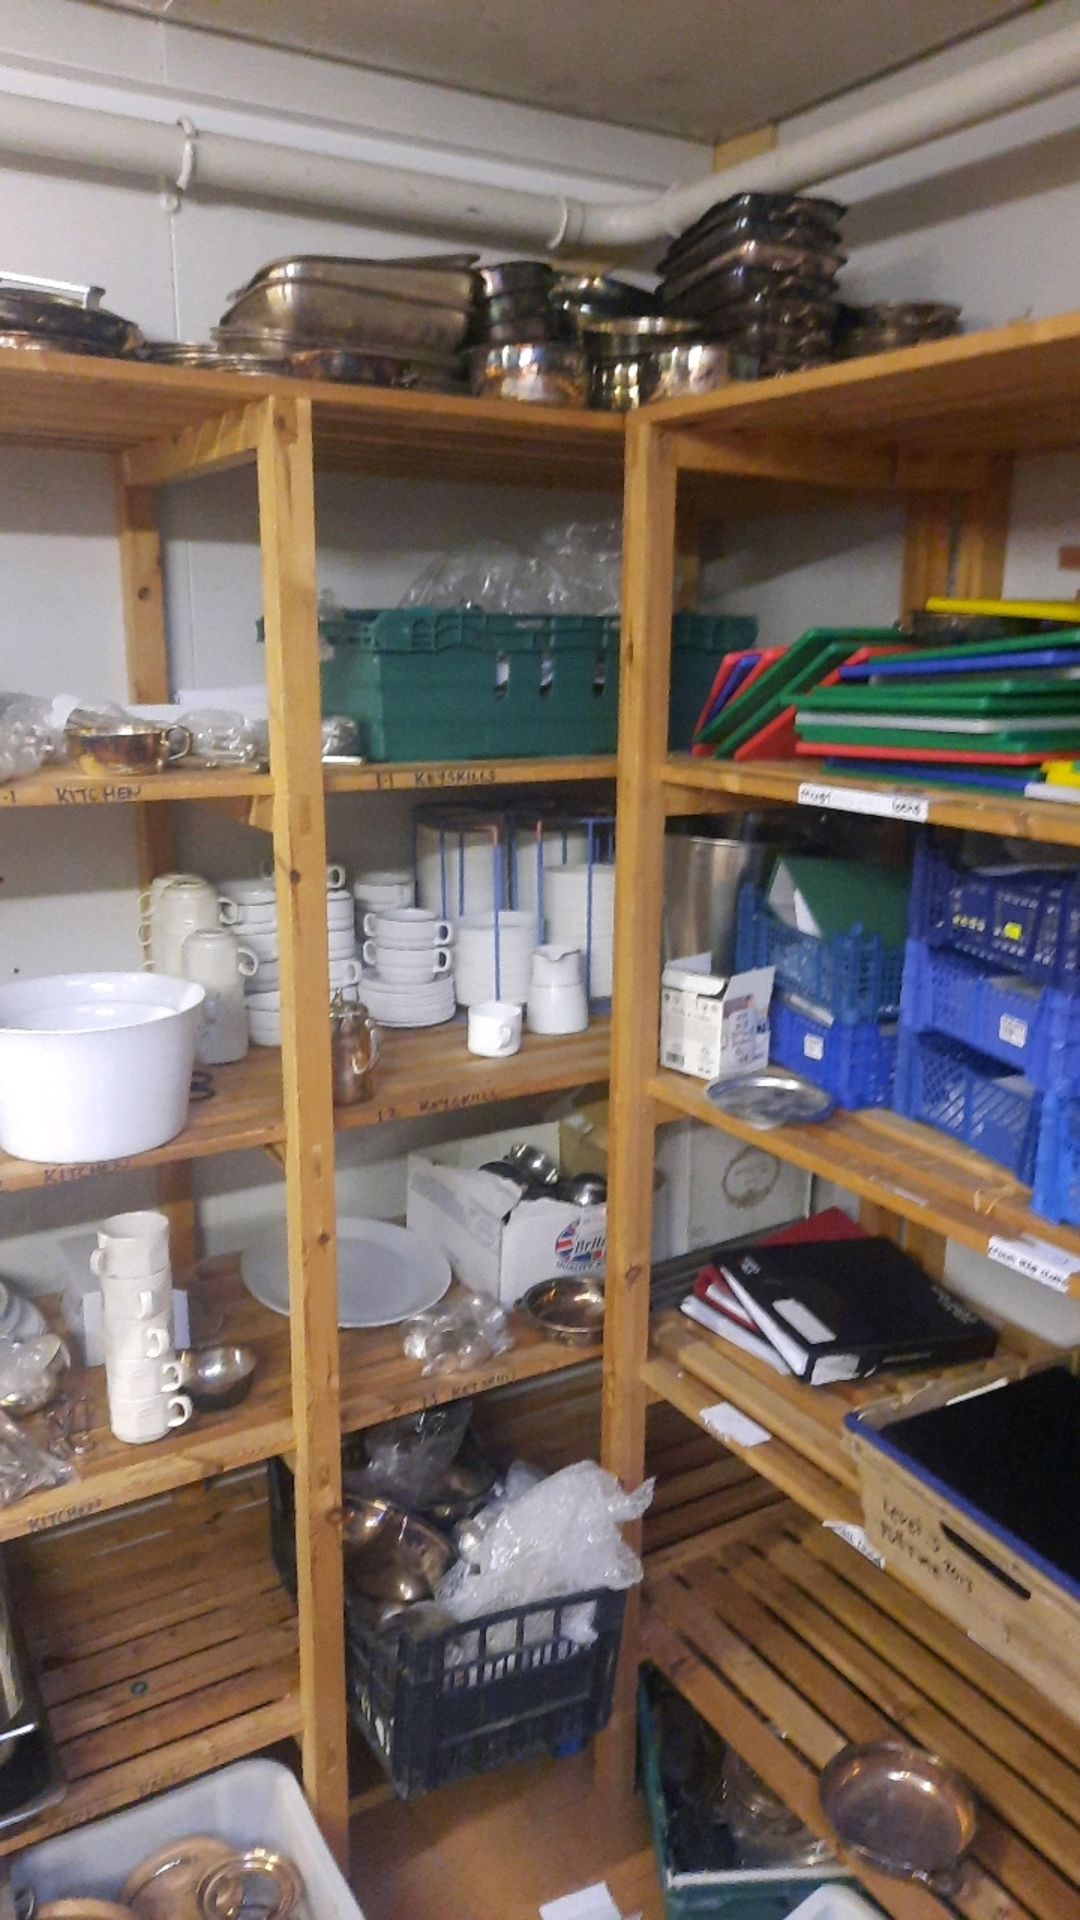 Contents Of Kitchen Storage Area Including Racking - Image 7 of 9